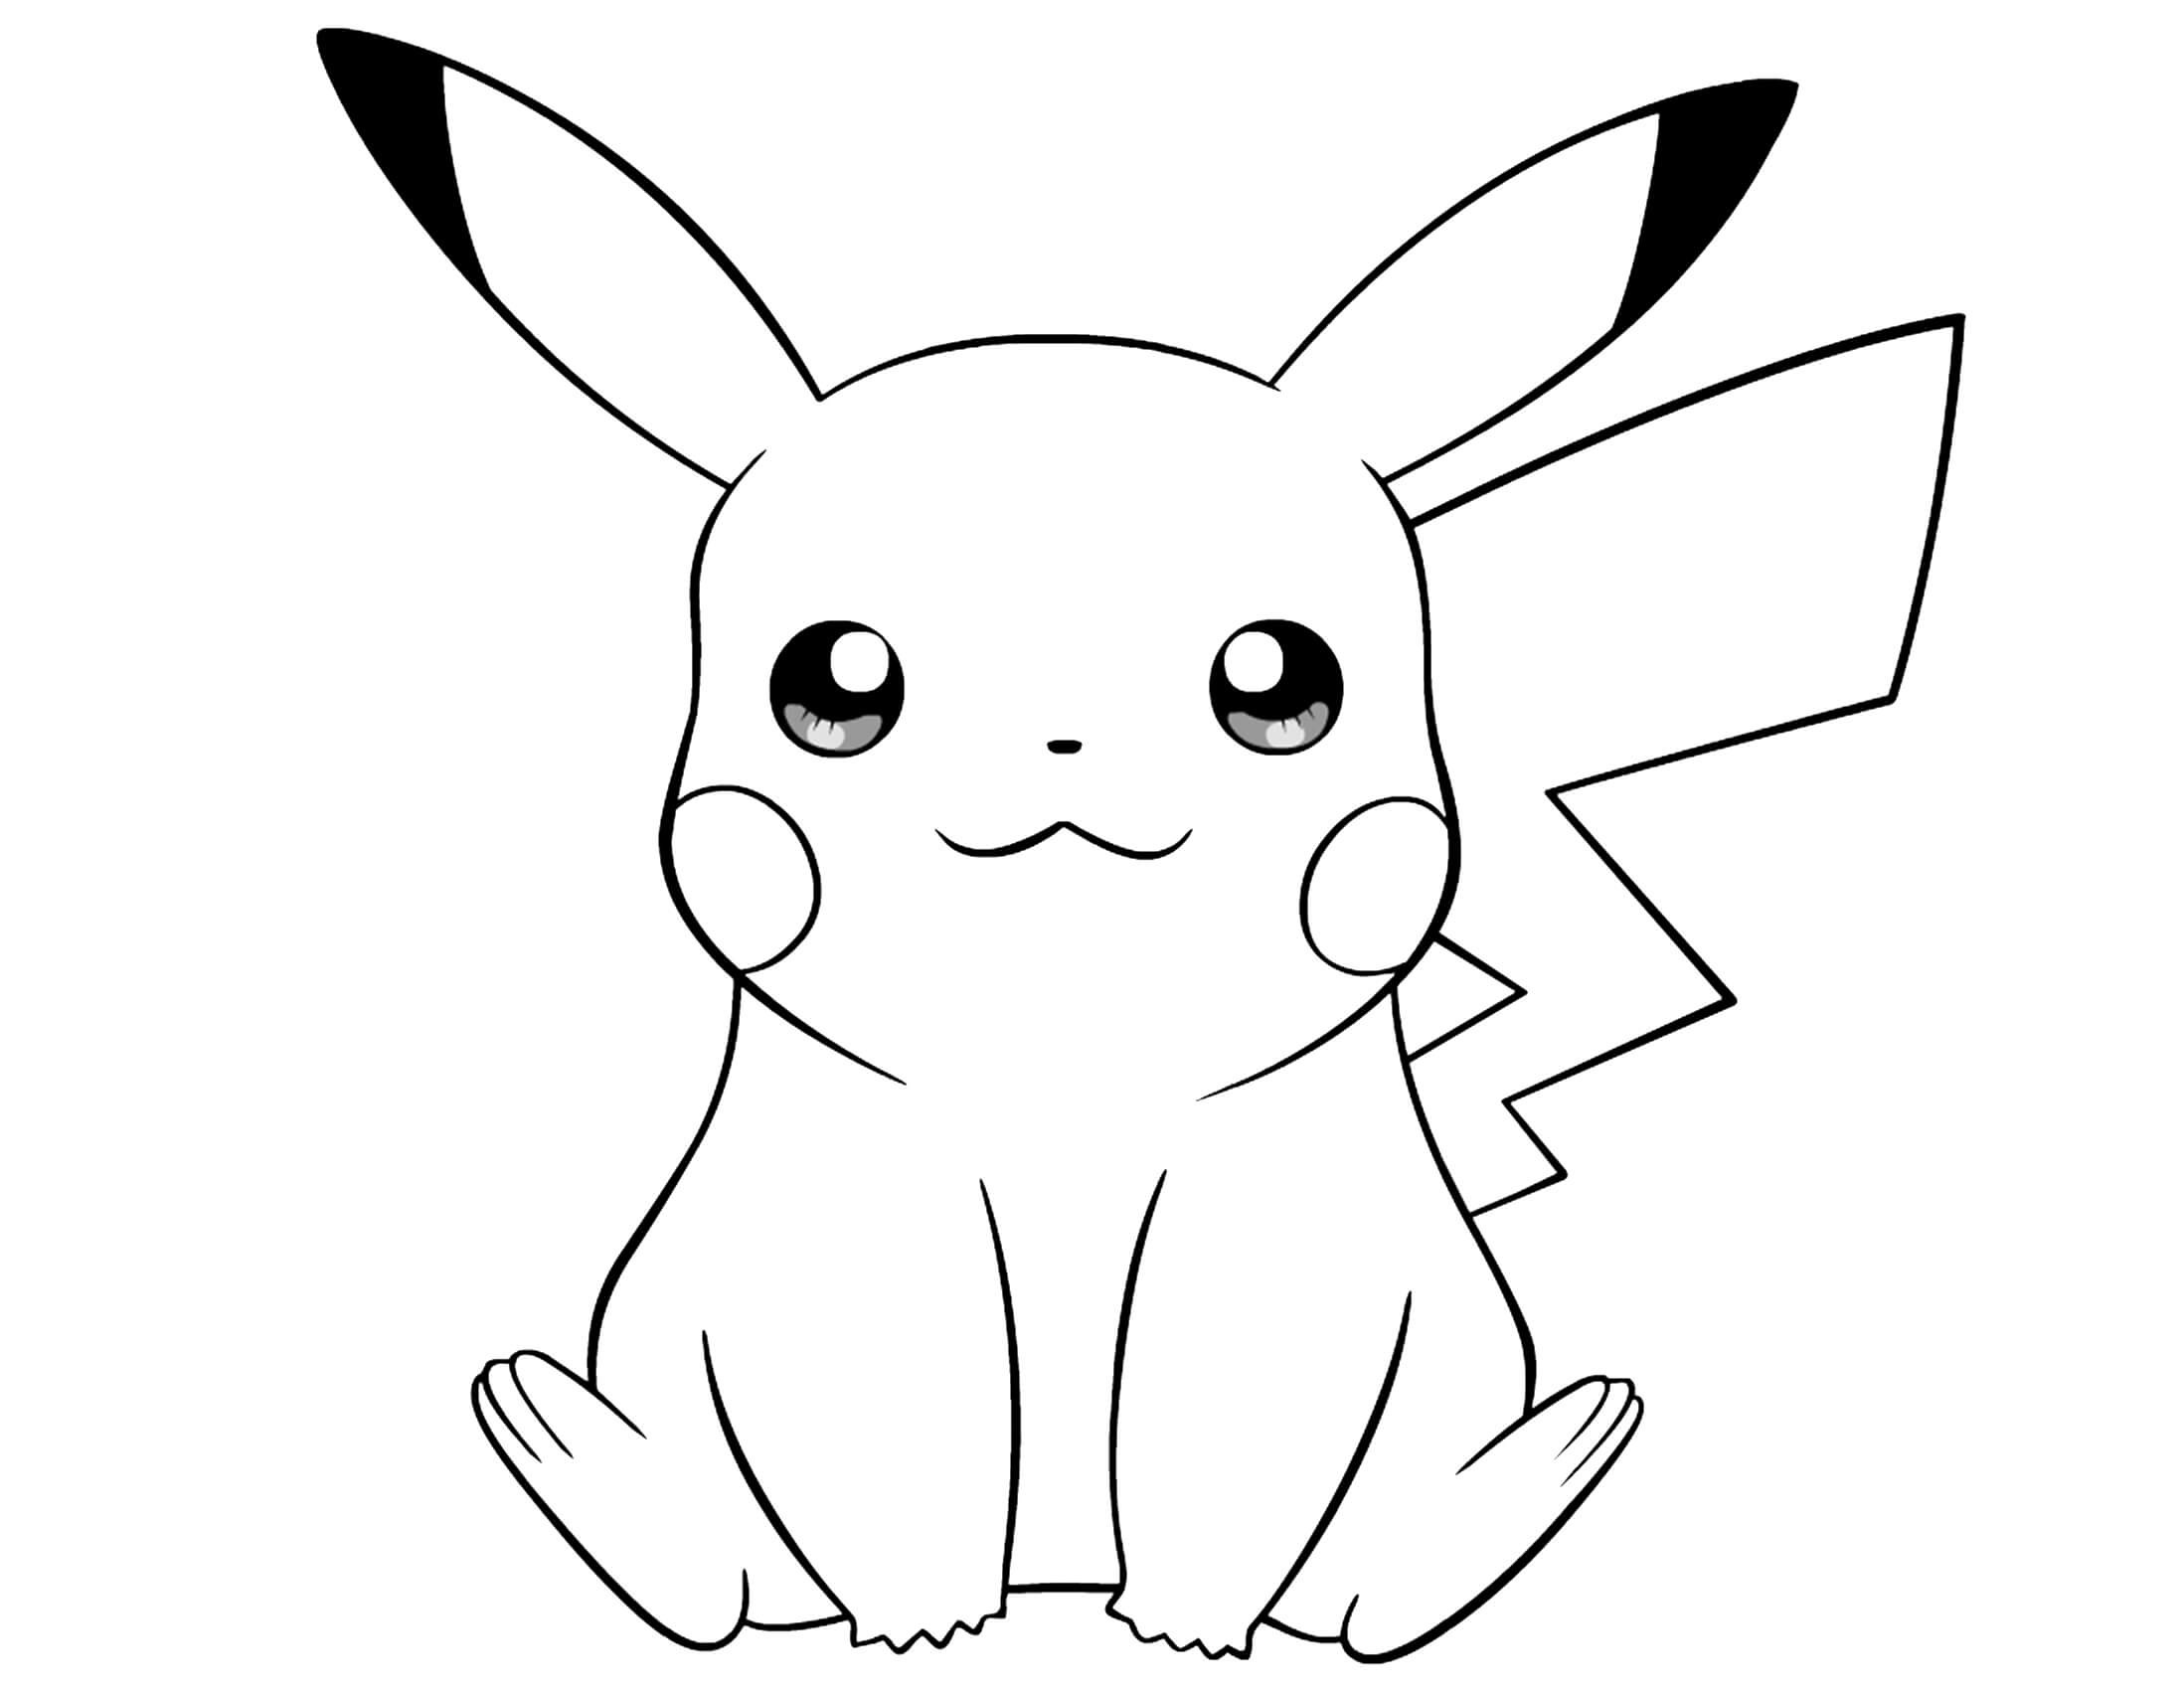 Cute Pikachu Coloring Pages
 35 Pikachu Coloring Pages ColoringStar